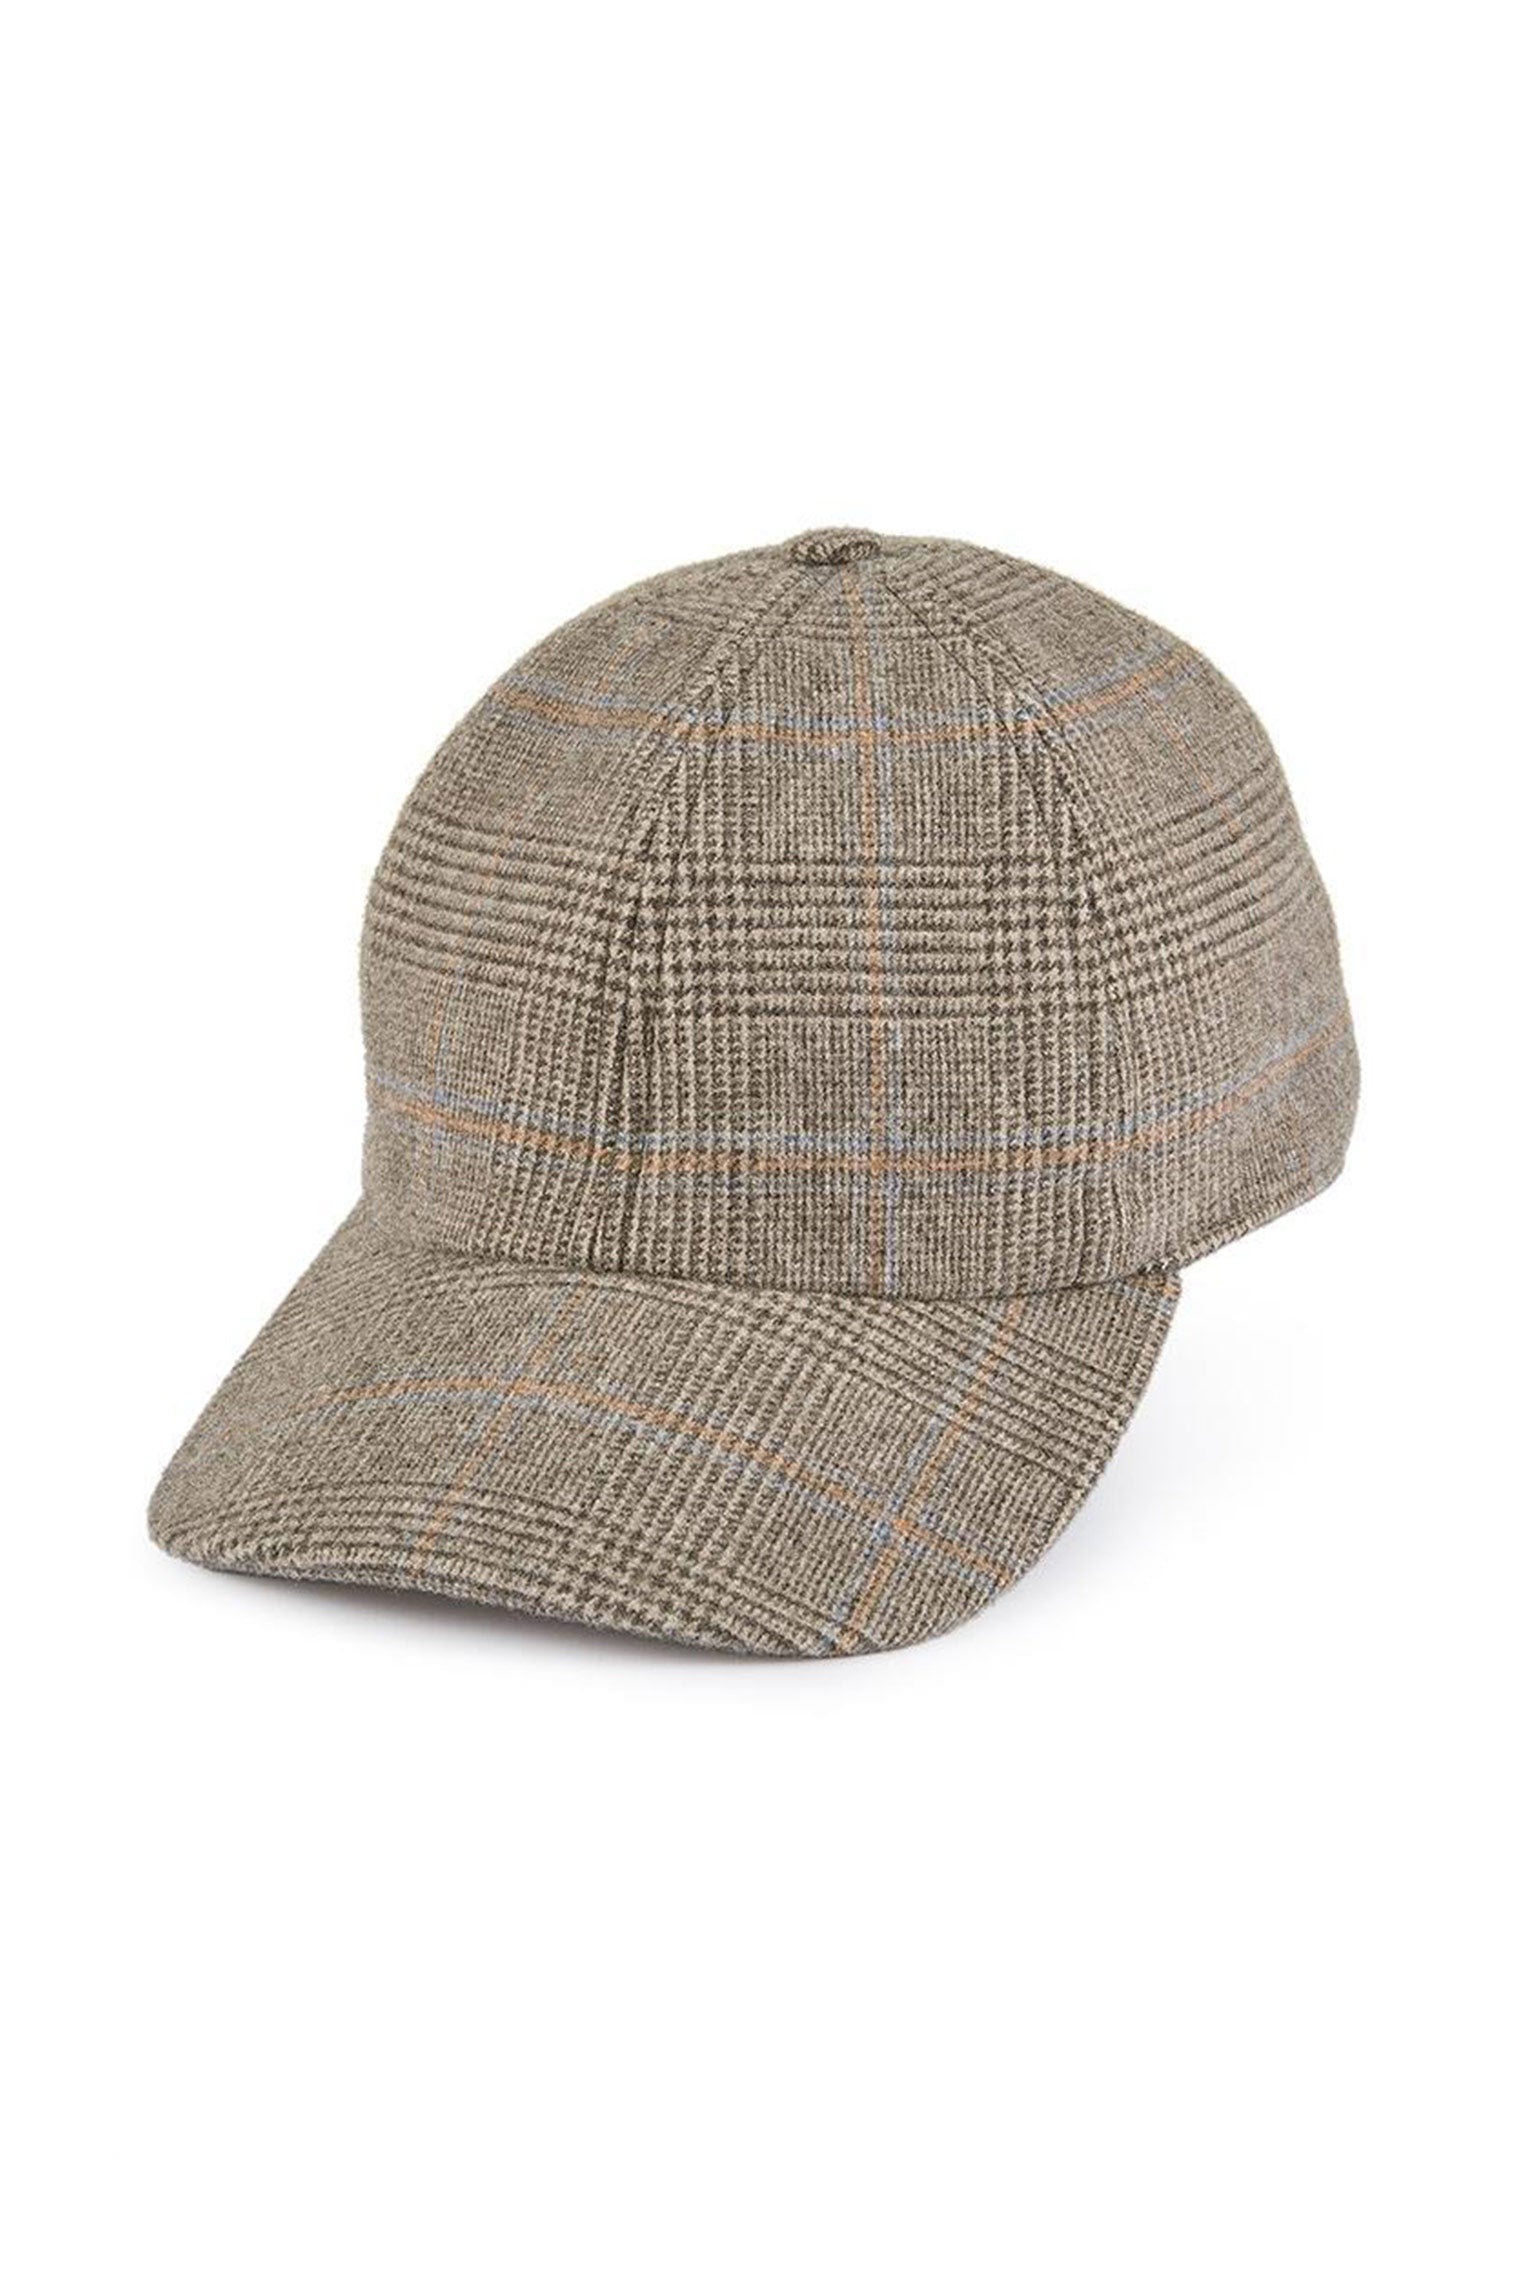 Escorial Wool Baseball Cap - Hats for Oval Face Shapes - Lock & Co. Hatters London UK